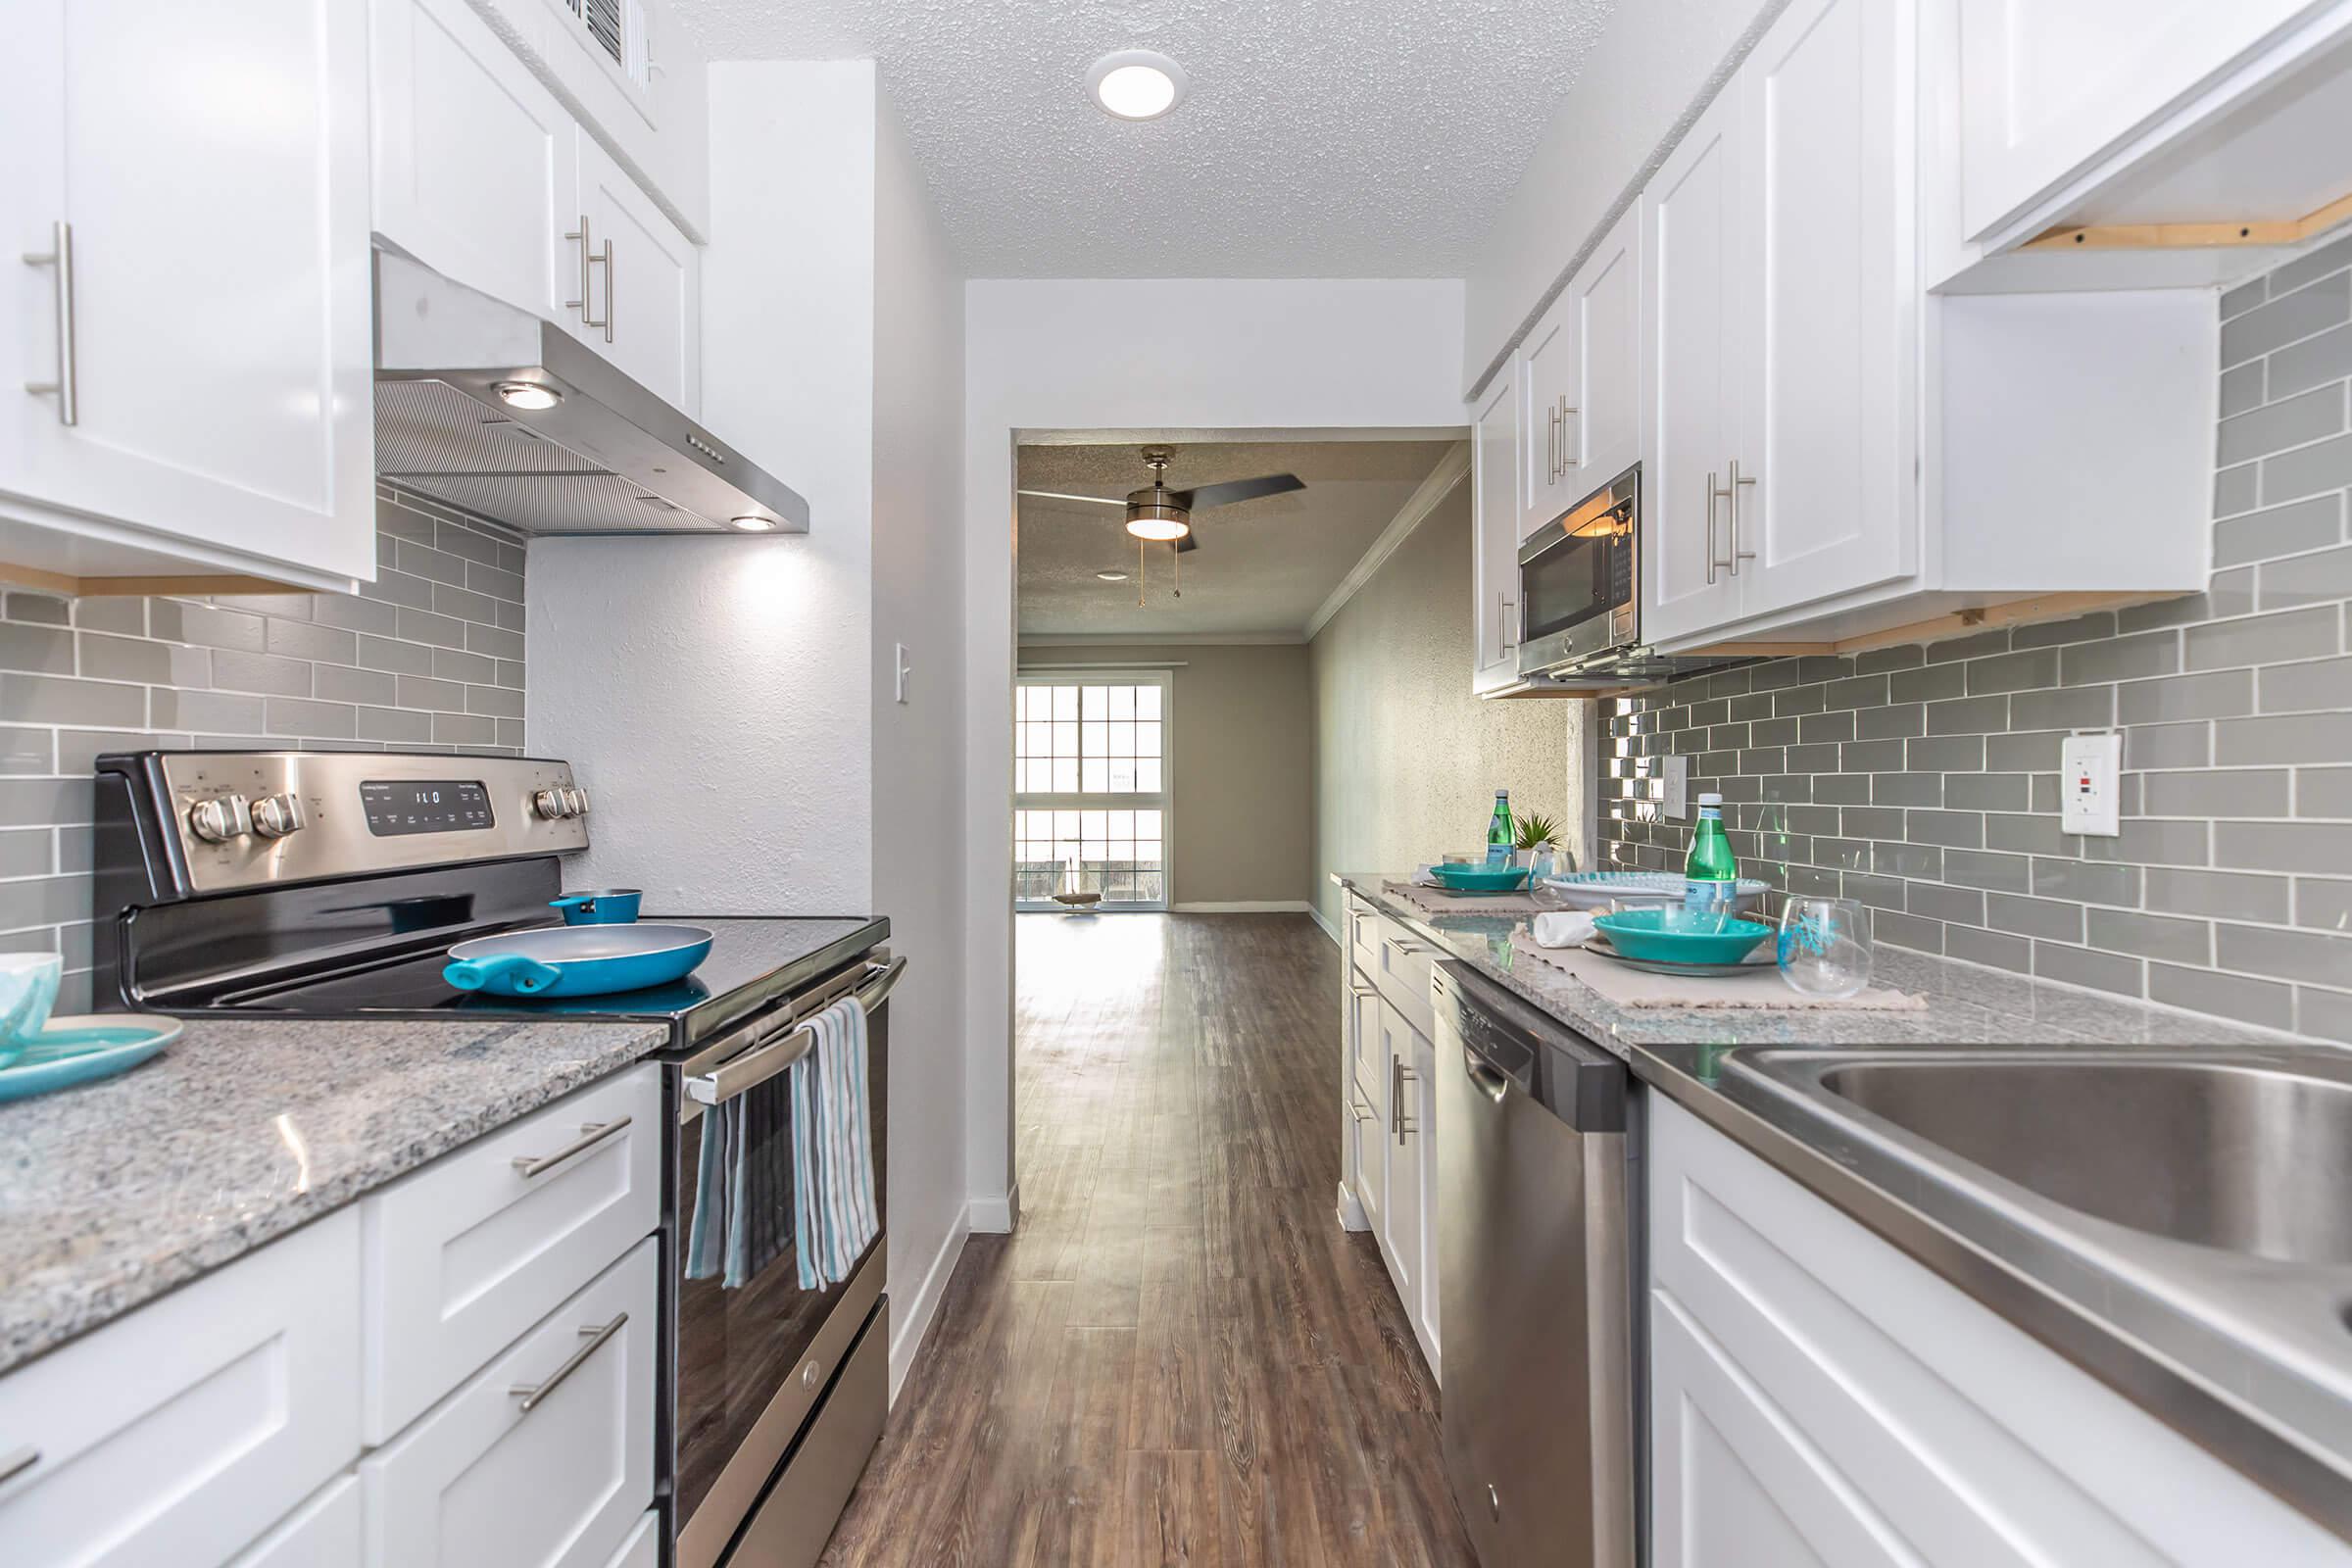 FULLY-EQUIPPED KITCHENS AT THE ARTS APARTMENTS AT OCEAN DRIVE